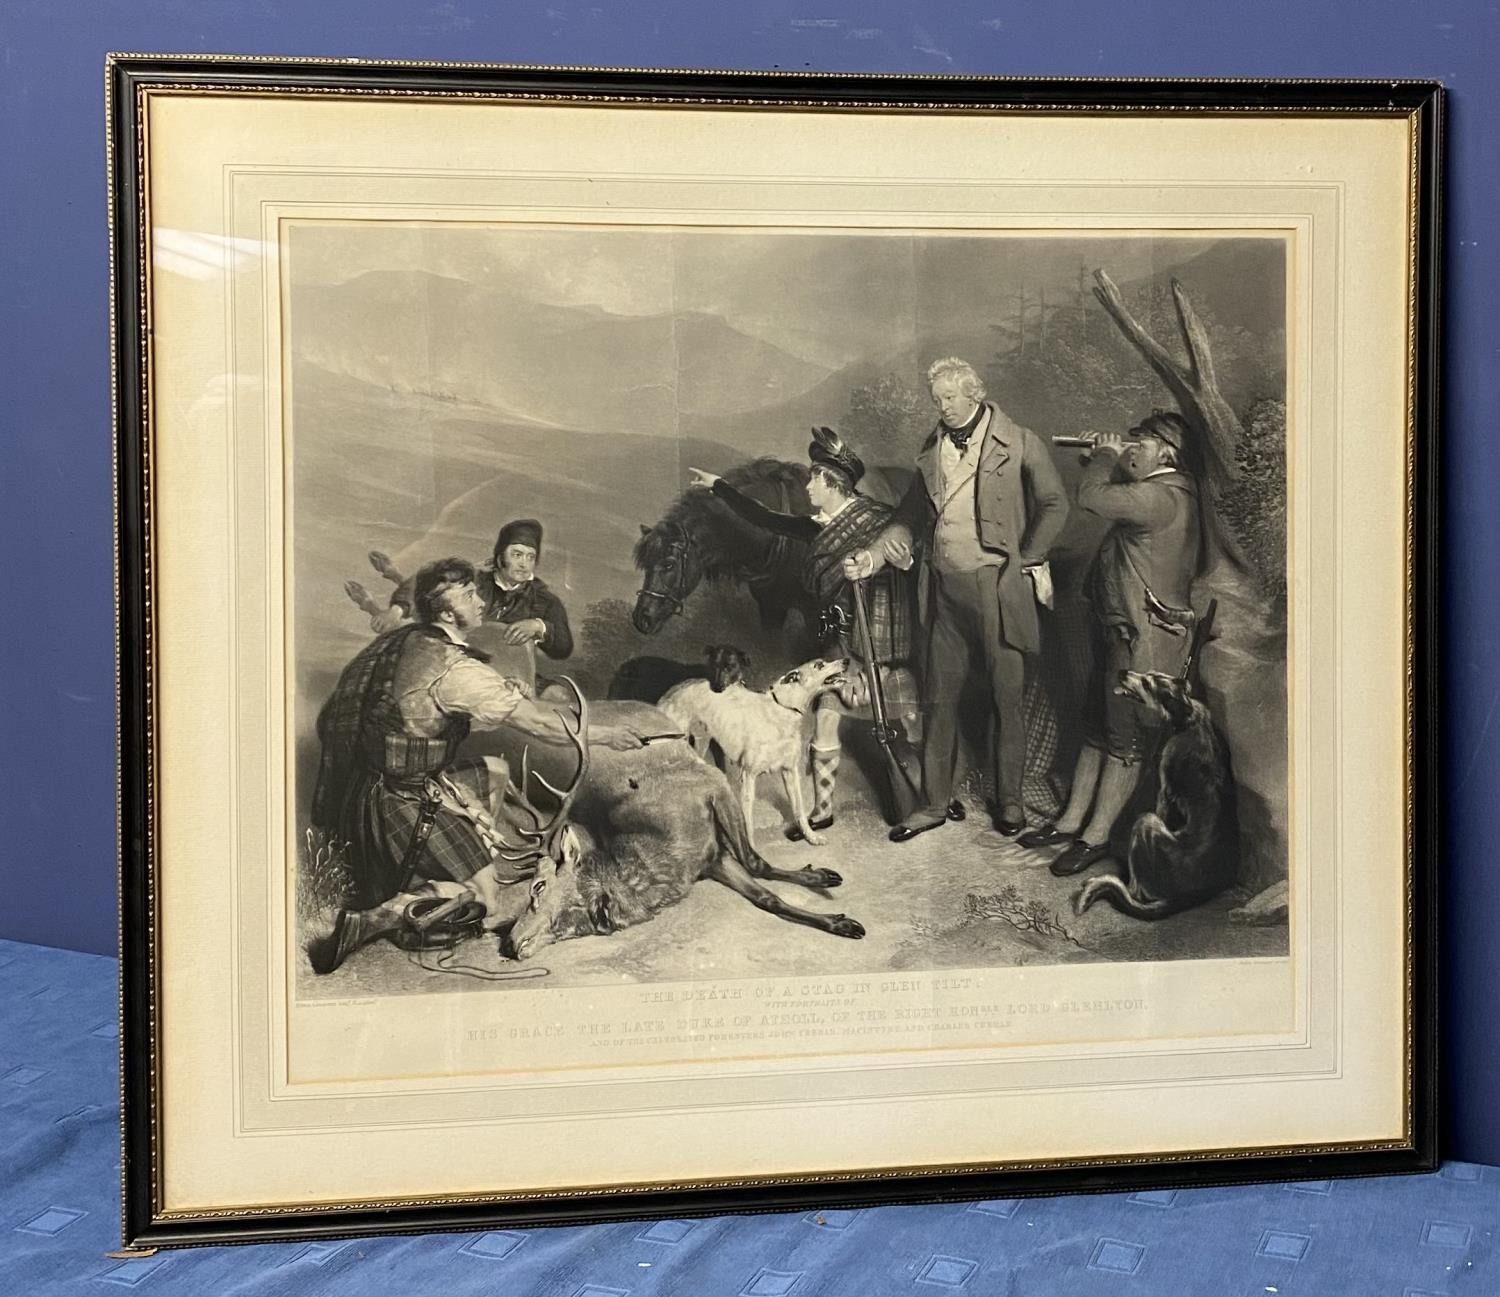 After Edwin Landseer, black and white print, "The Death of a Stag in Glen Tilt", engraved by J